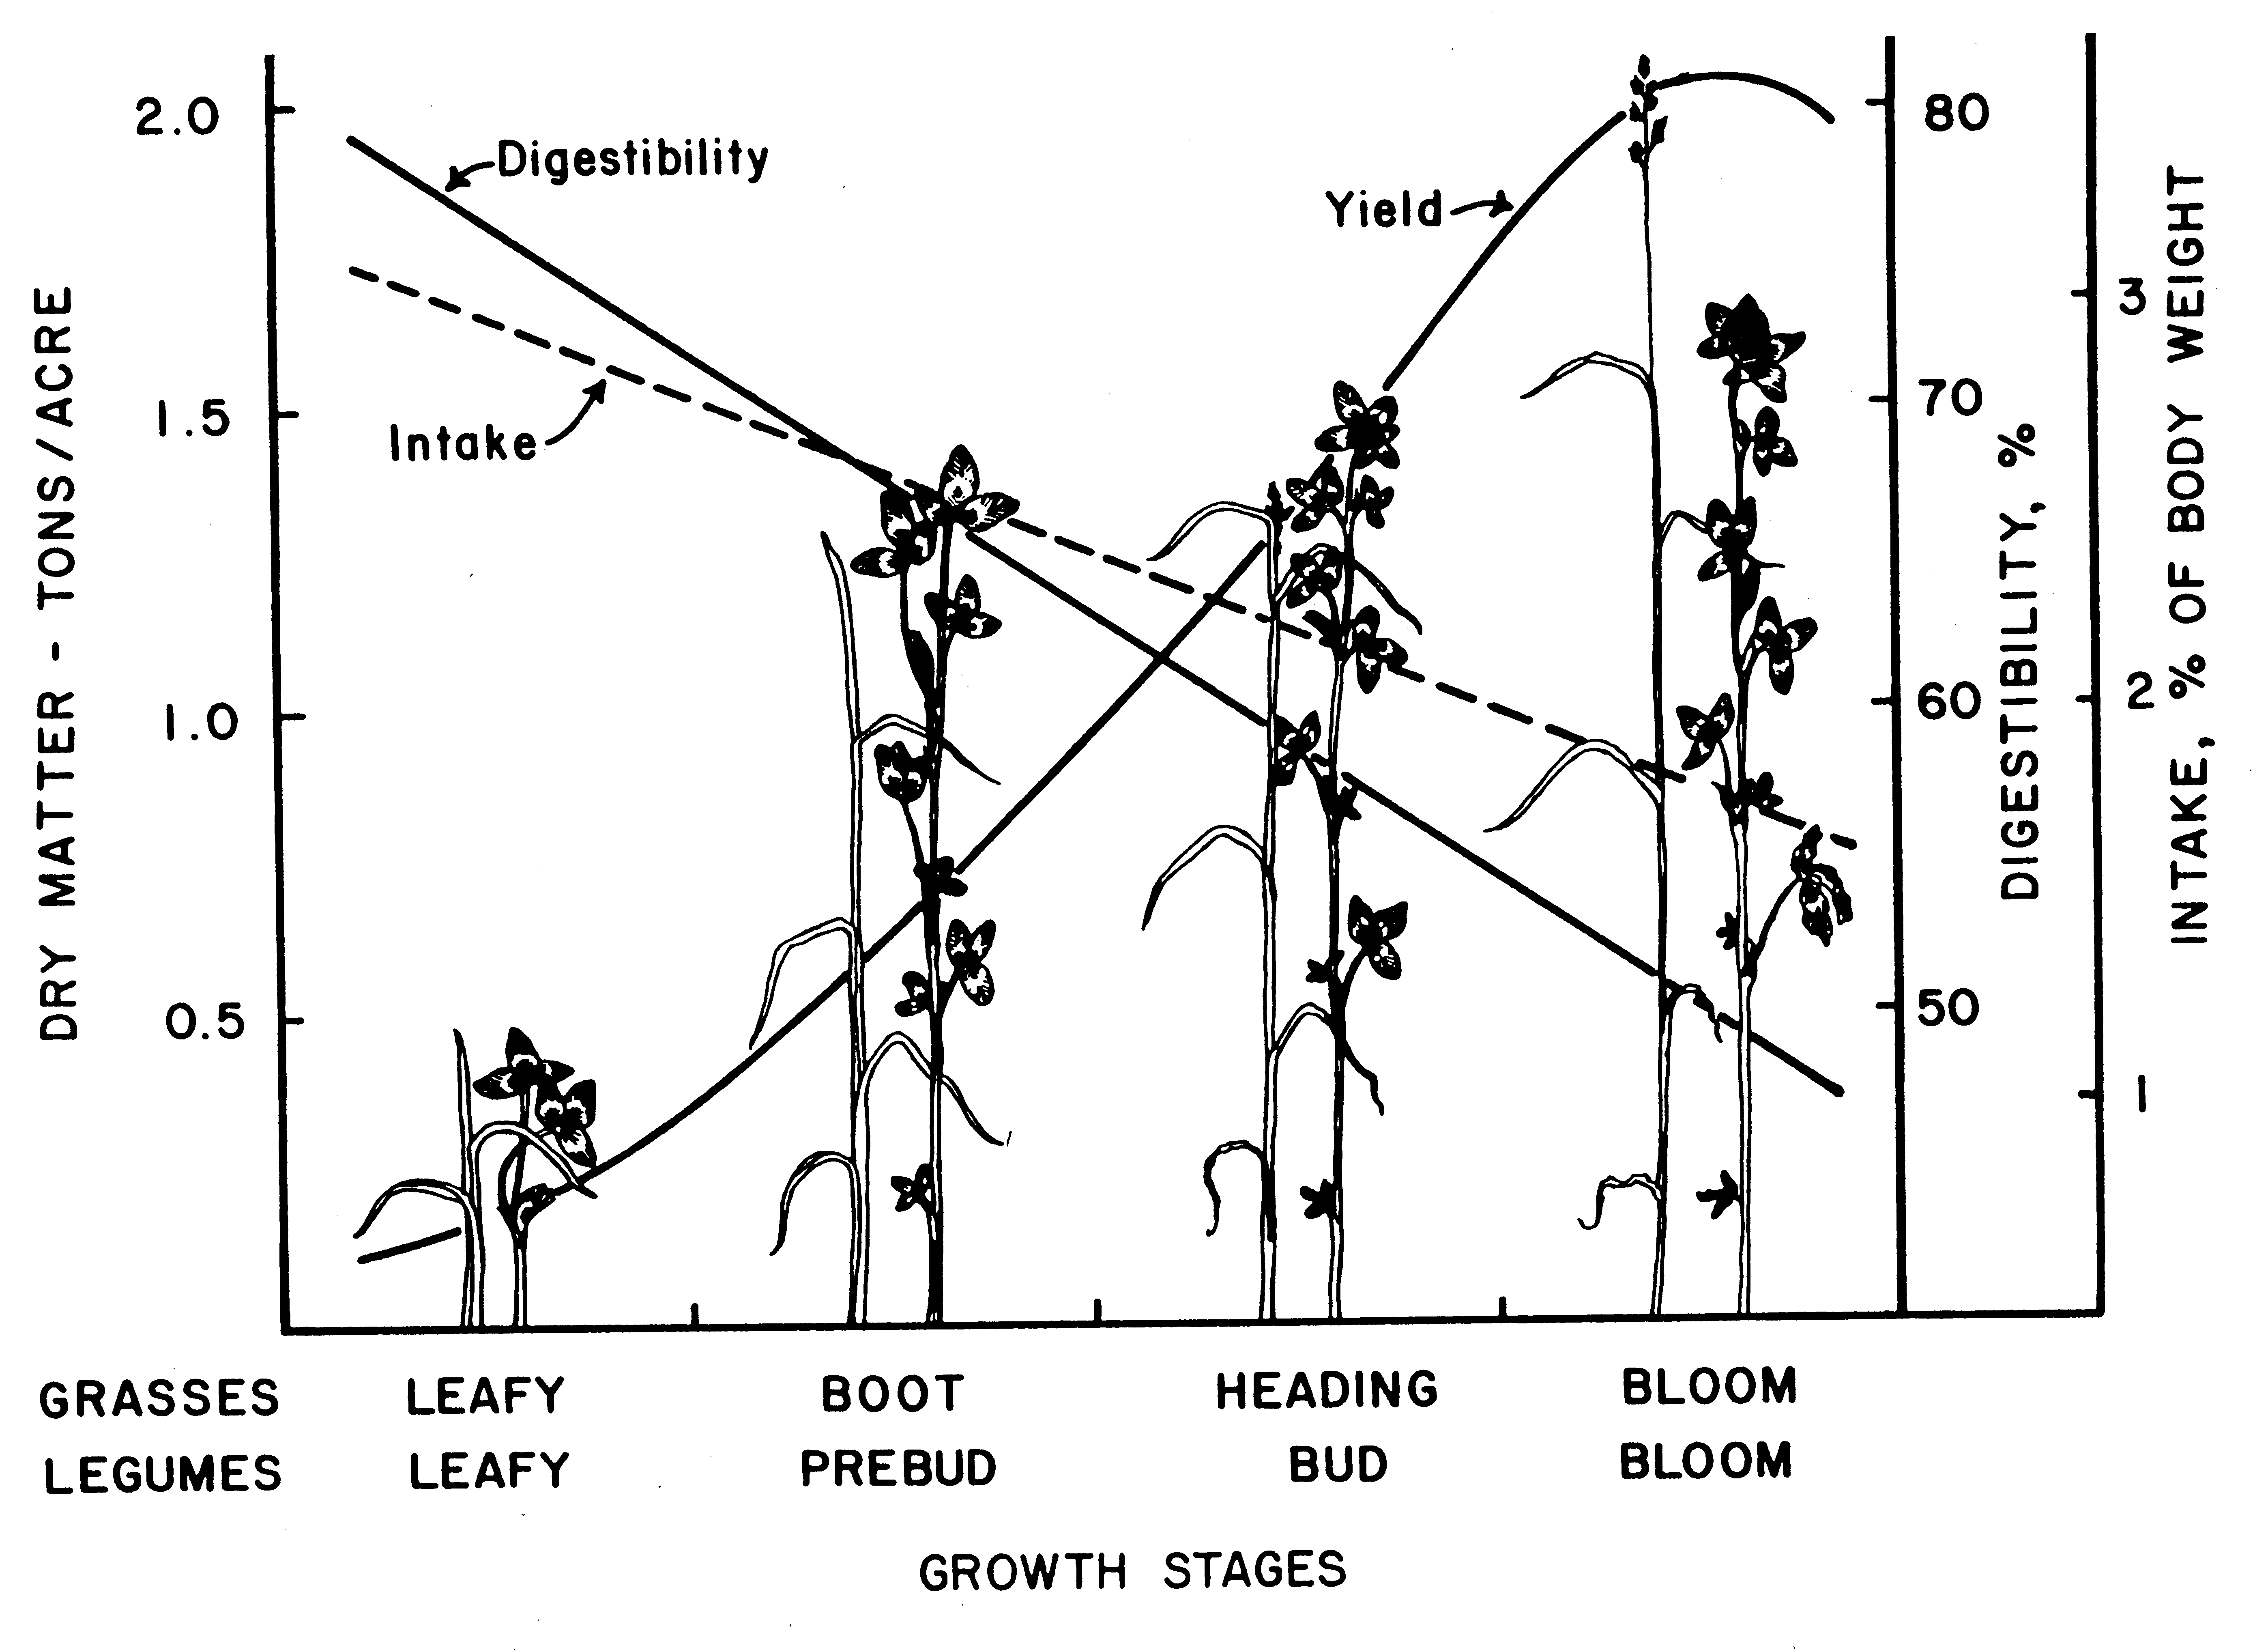 Figure 1.  Impact of stage of maturity on the yield and digestibility of grasses and legumes. Harvest when the grass reached the boot stage